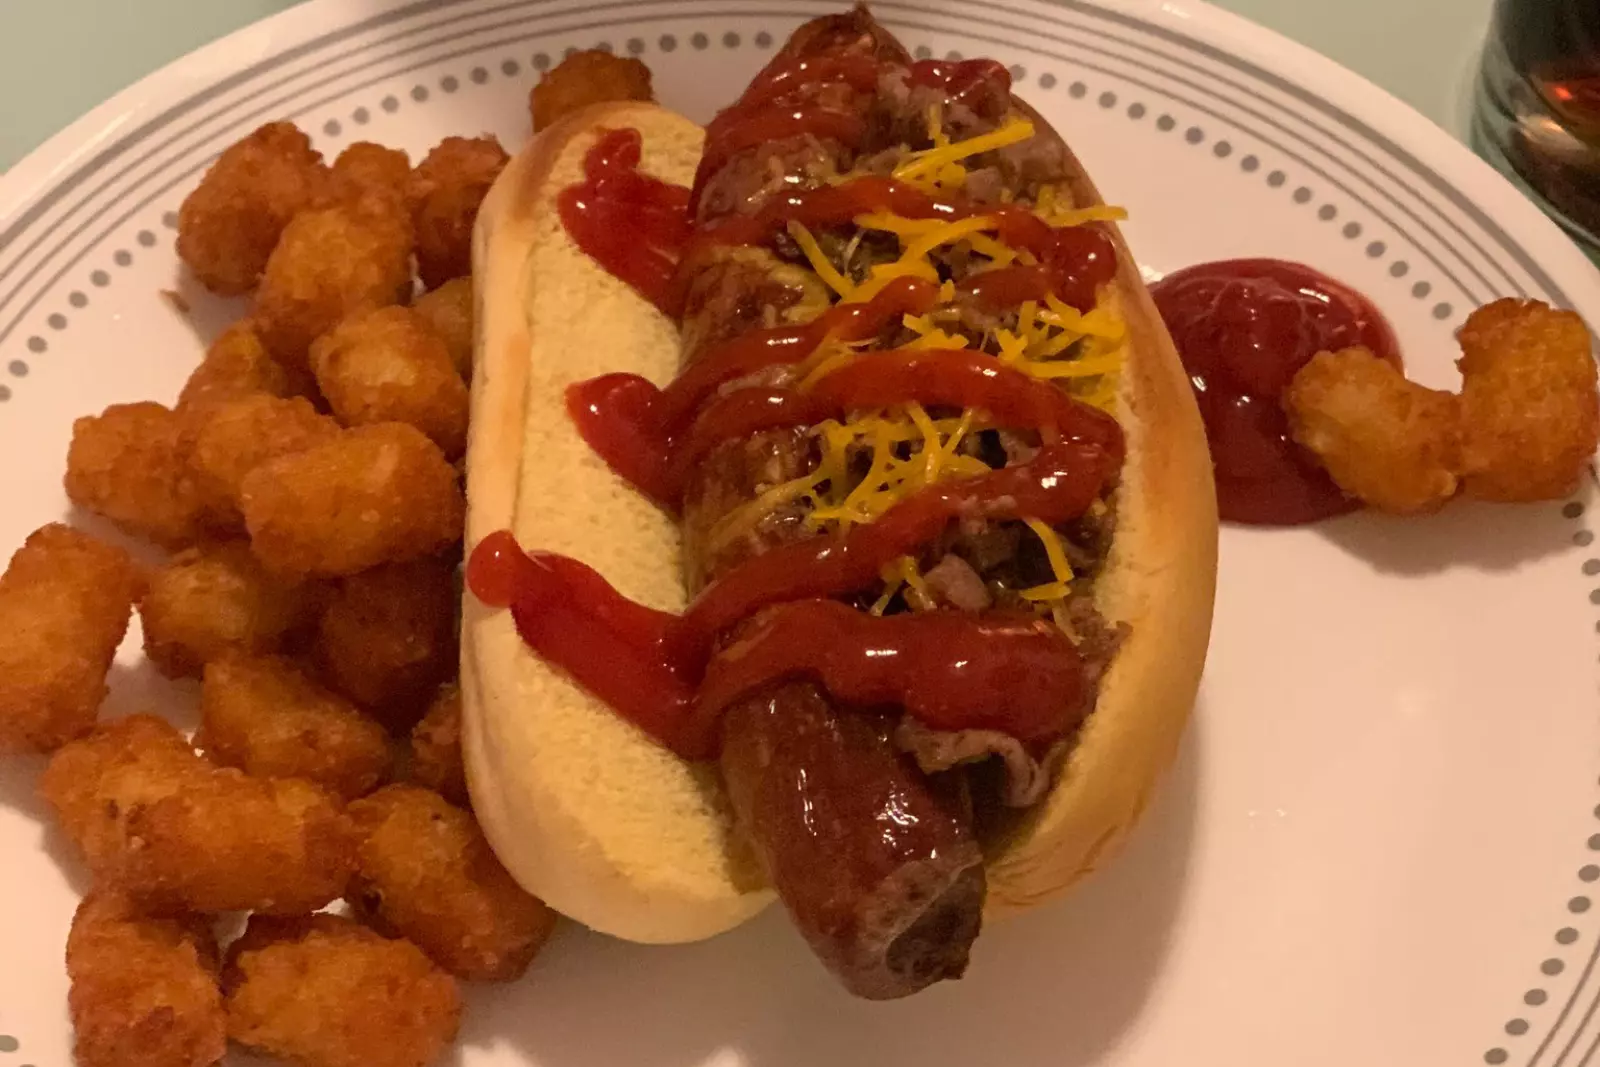 THE BEST 10 Hot Dogs in FRAMINGHAM, MA - Last Updated December 2023 - Yelp